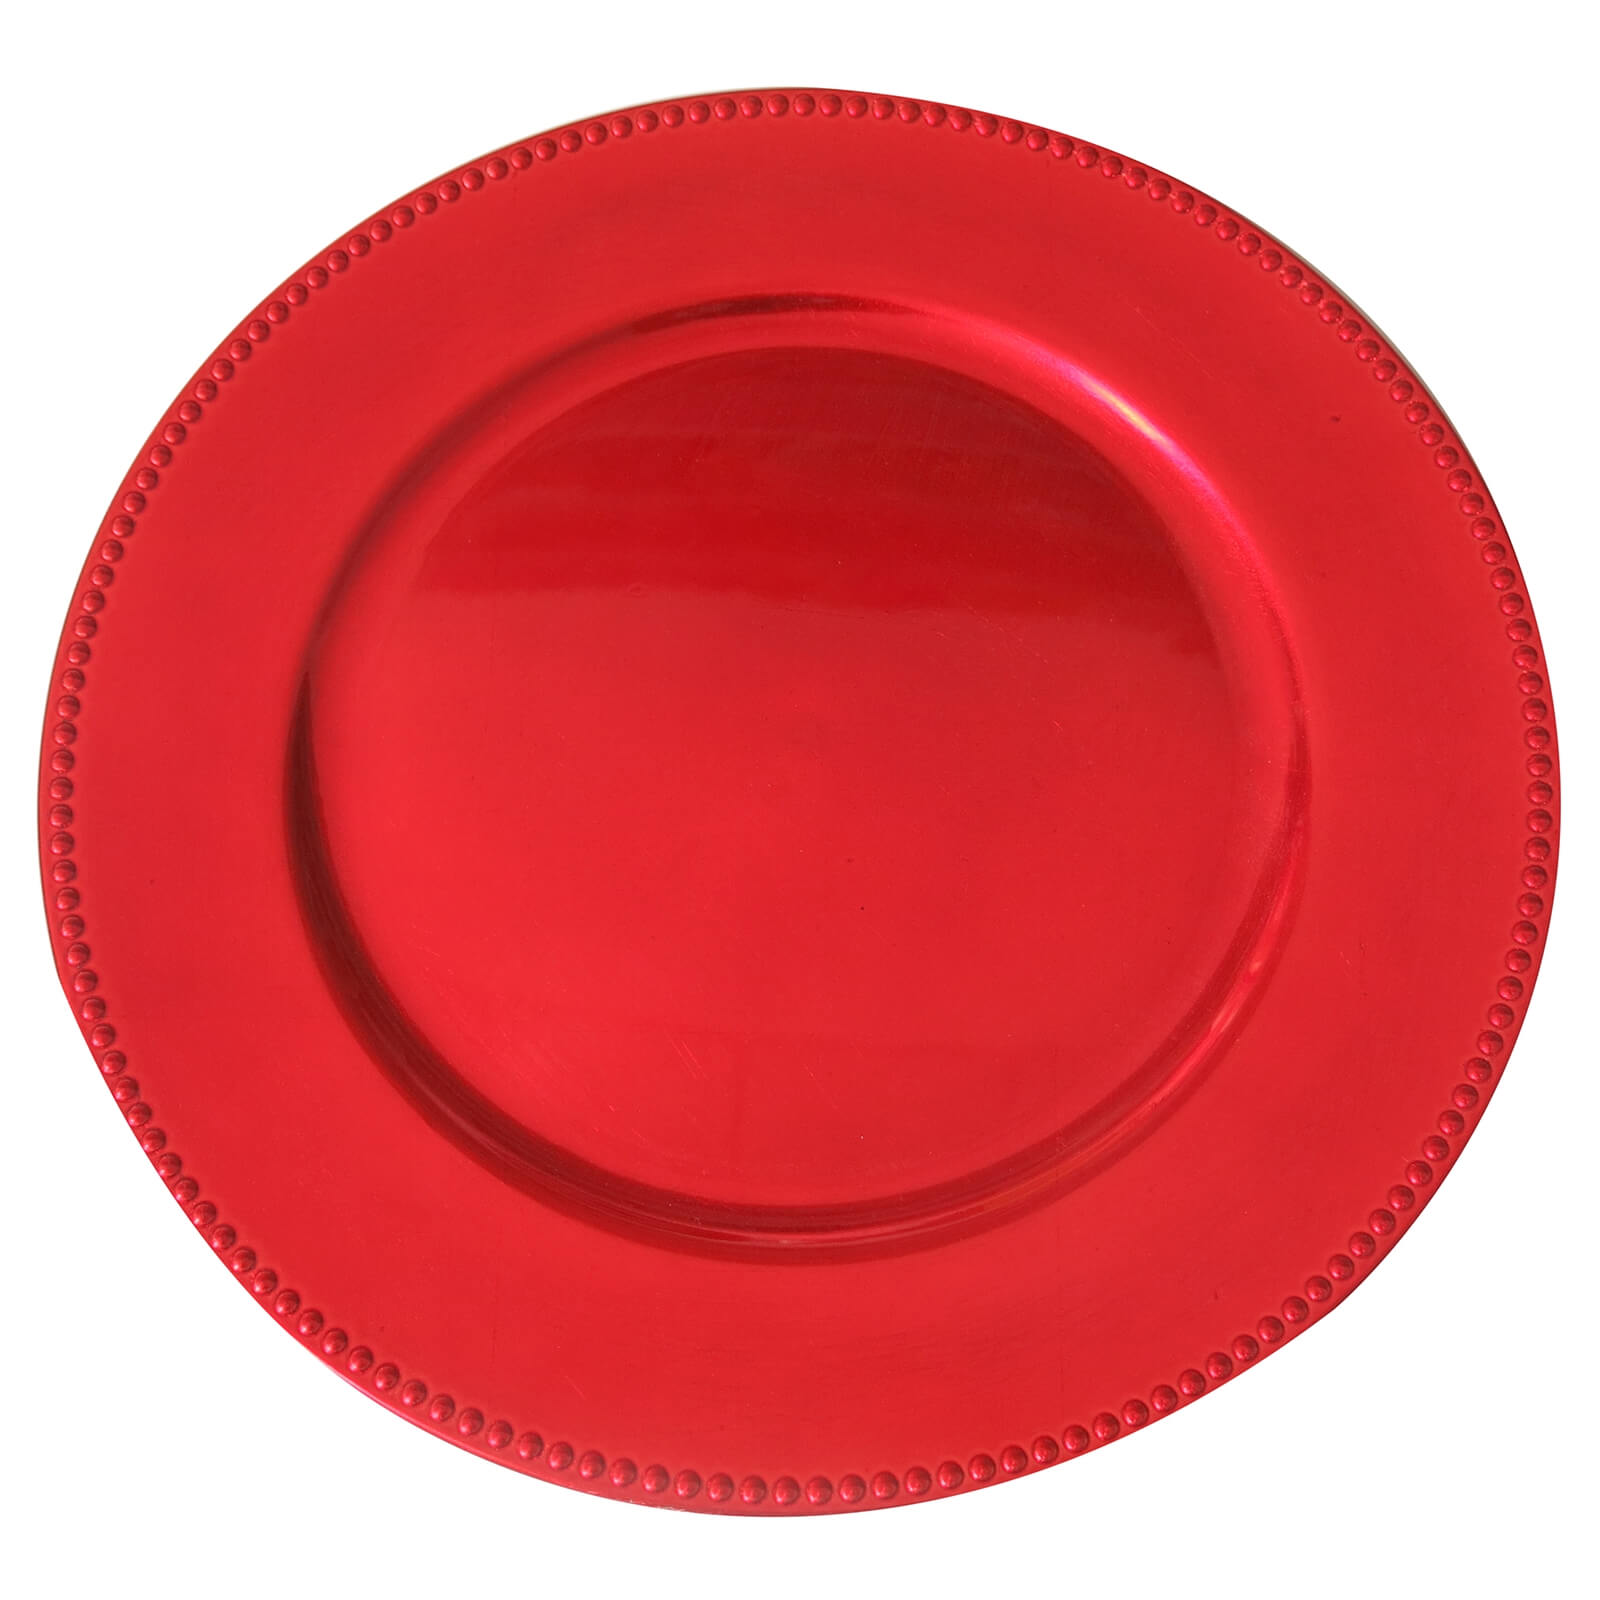 Charger Plate - Red